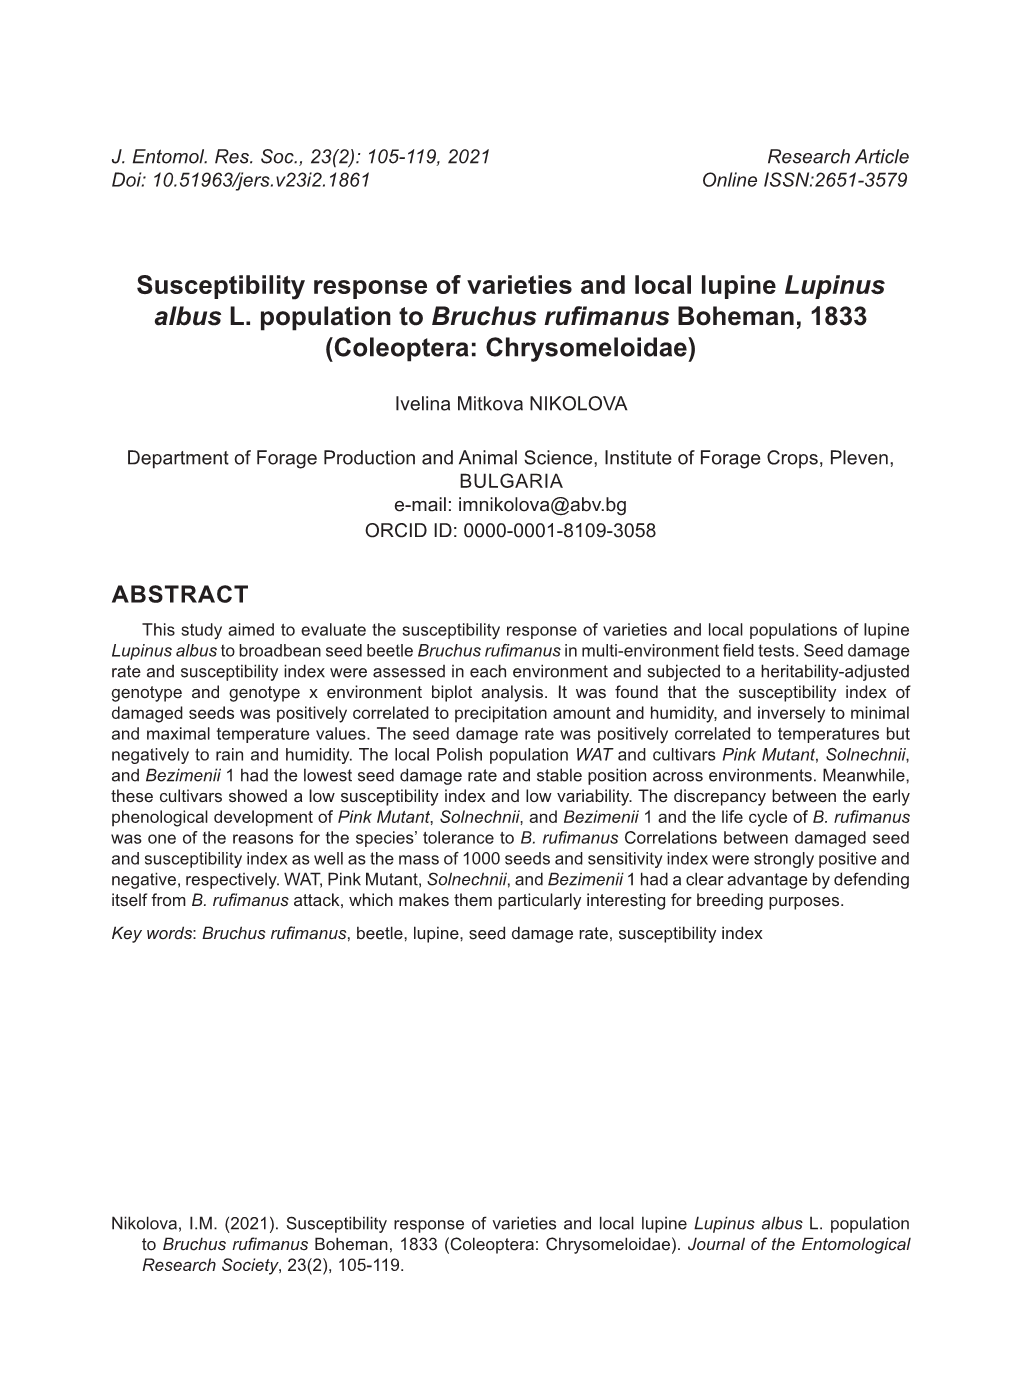 Susceptibility Response of Varieties and Local Lupine Lupinus Albus L. Population to Bruchus Rufimanus Boheman, 1833 (Coleoptera: Chrysomeloidae)